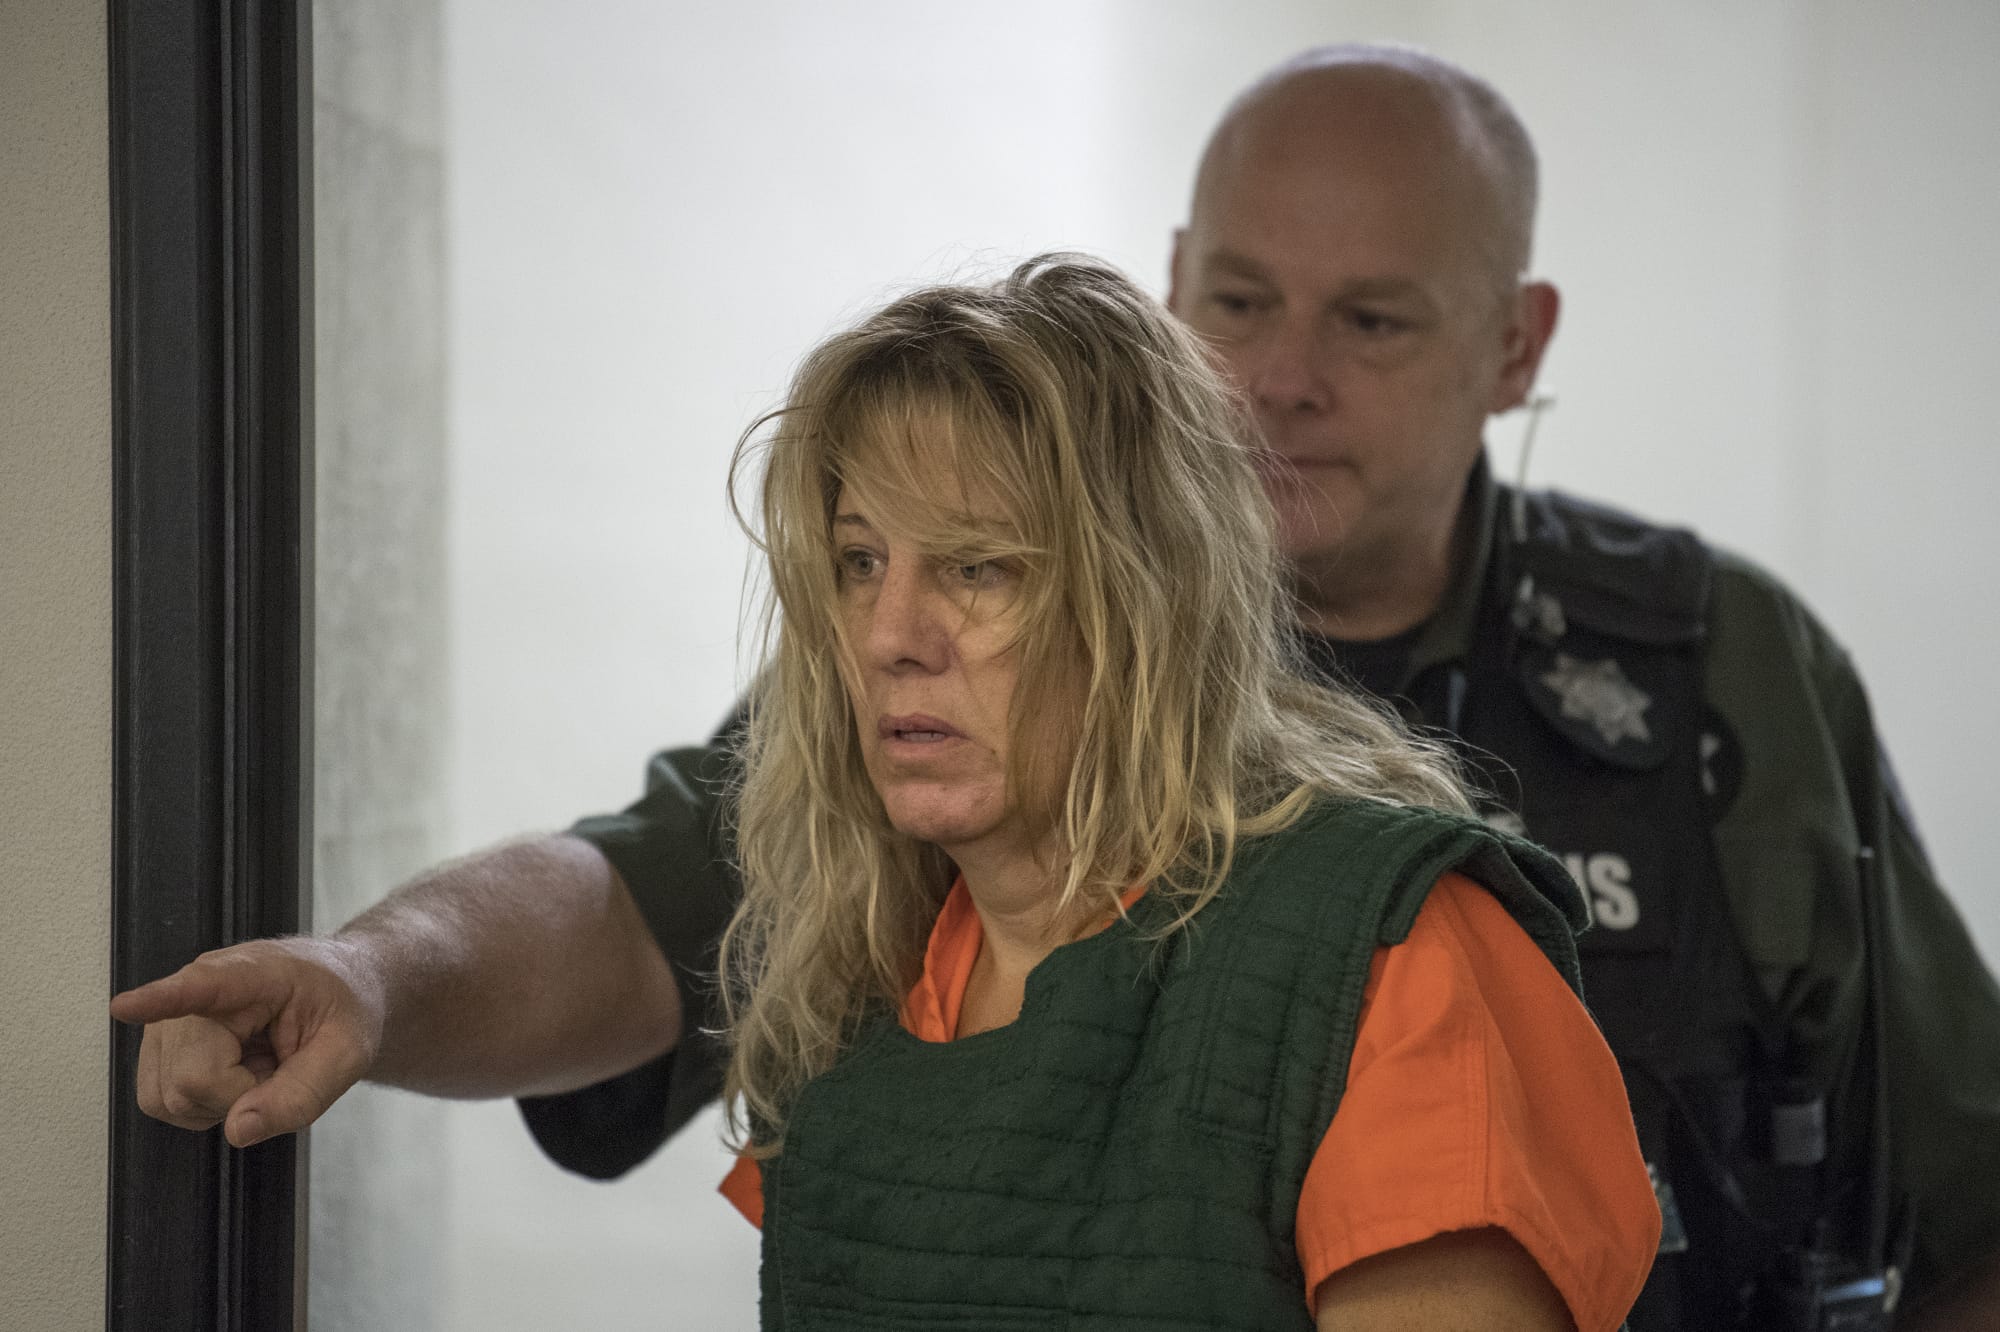 Stephanie "Sam" Westby makes a first appearance Sept. 17 in Clark County Superior Court on suspicion of first-degree domestic violence murder in the slaying of her husband, 51-year-old Joseph Westby. Sam Westby, who posted bail and appeared out of custody Friday, entered a not-guilty plea to the charge.